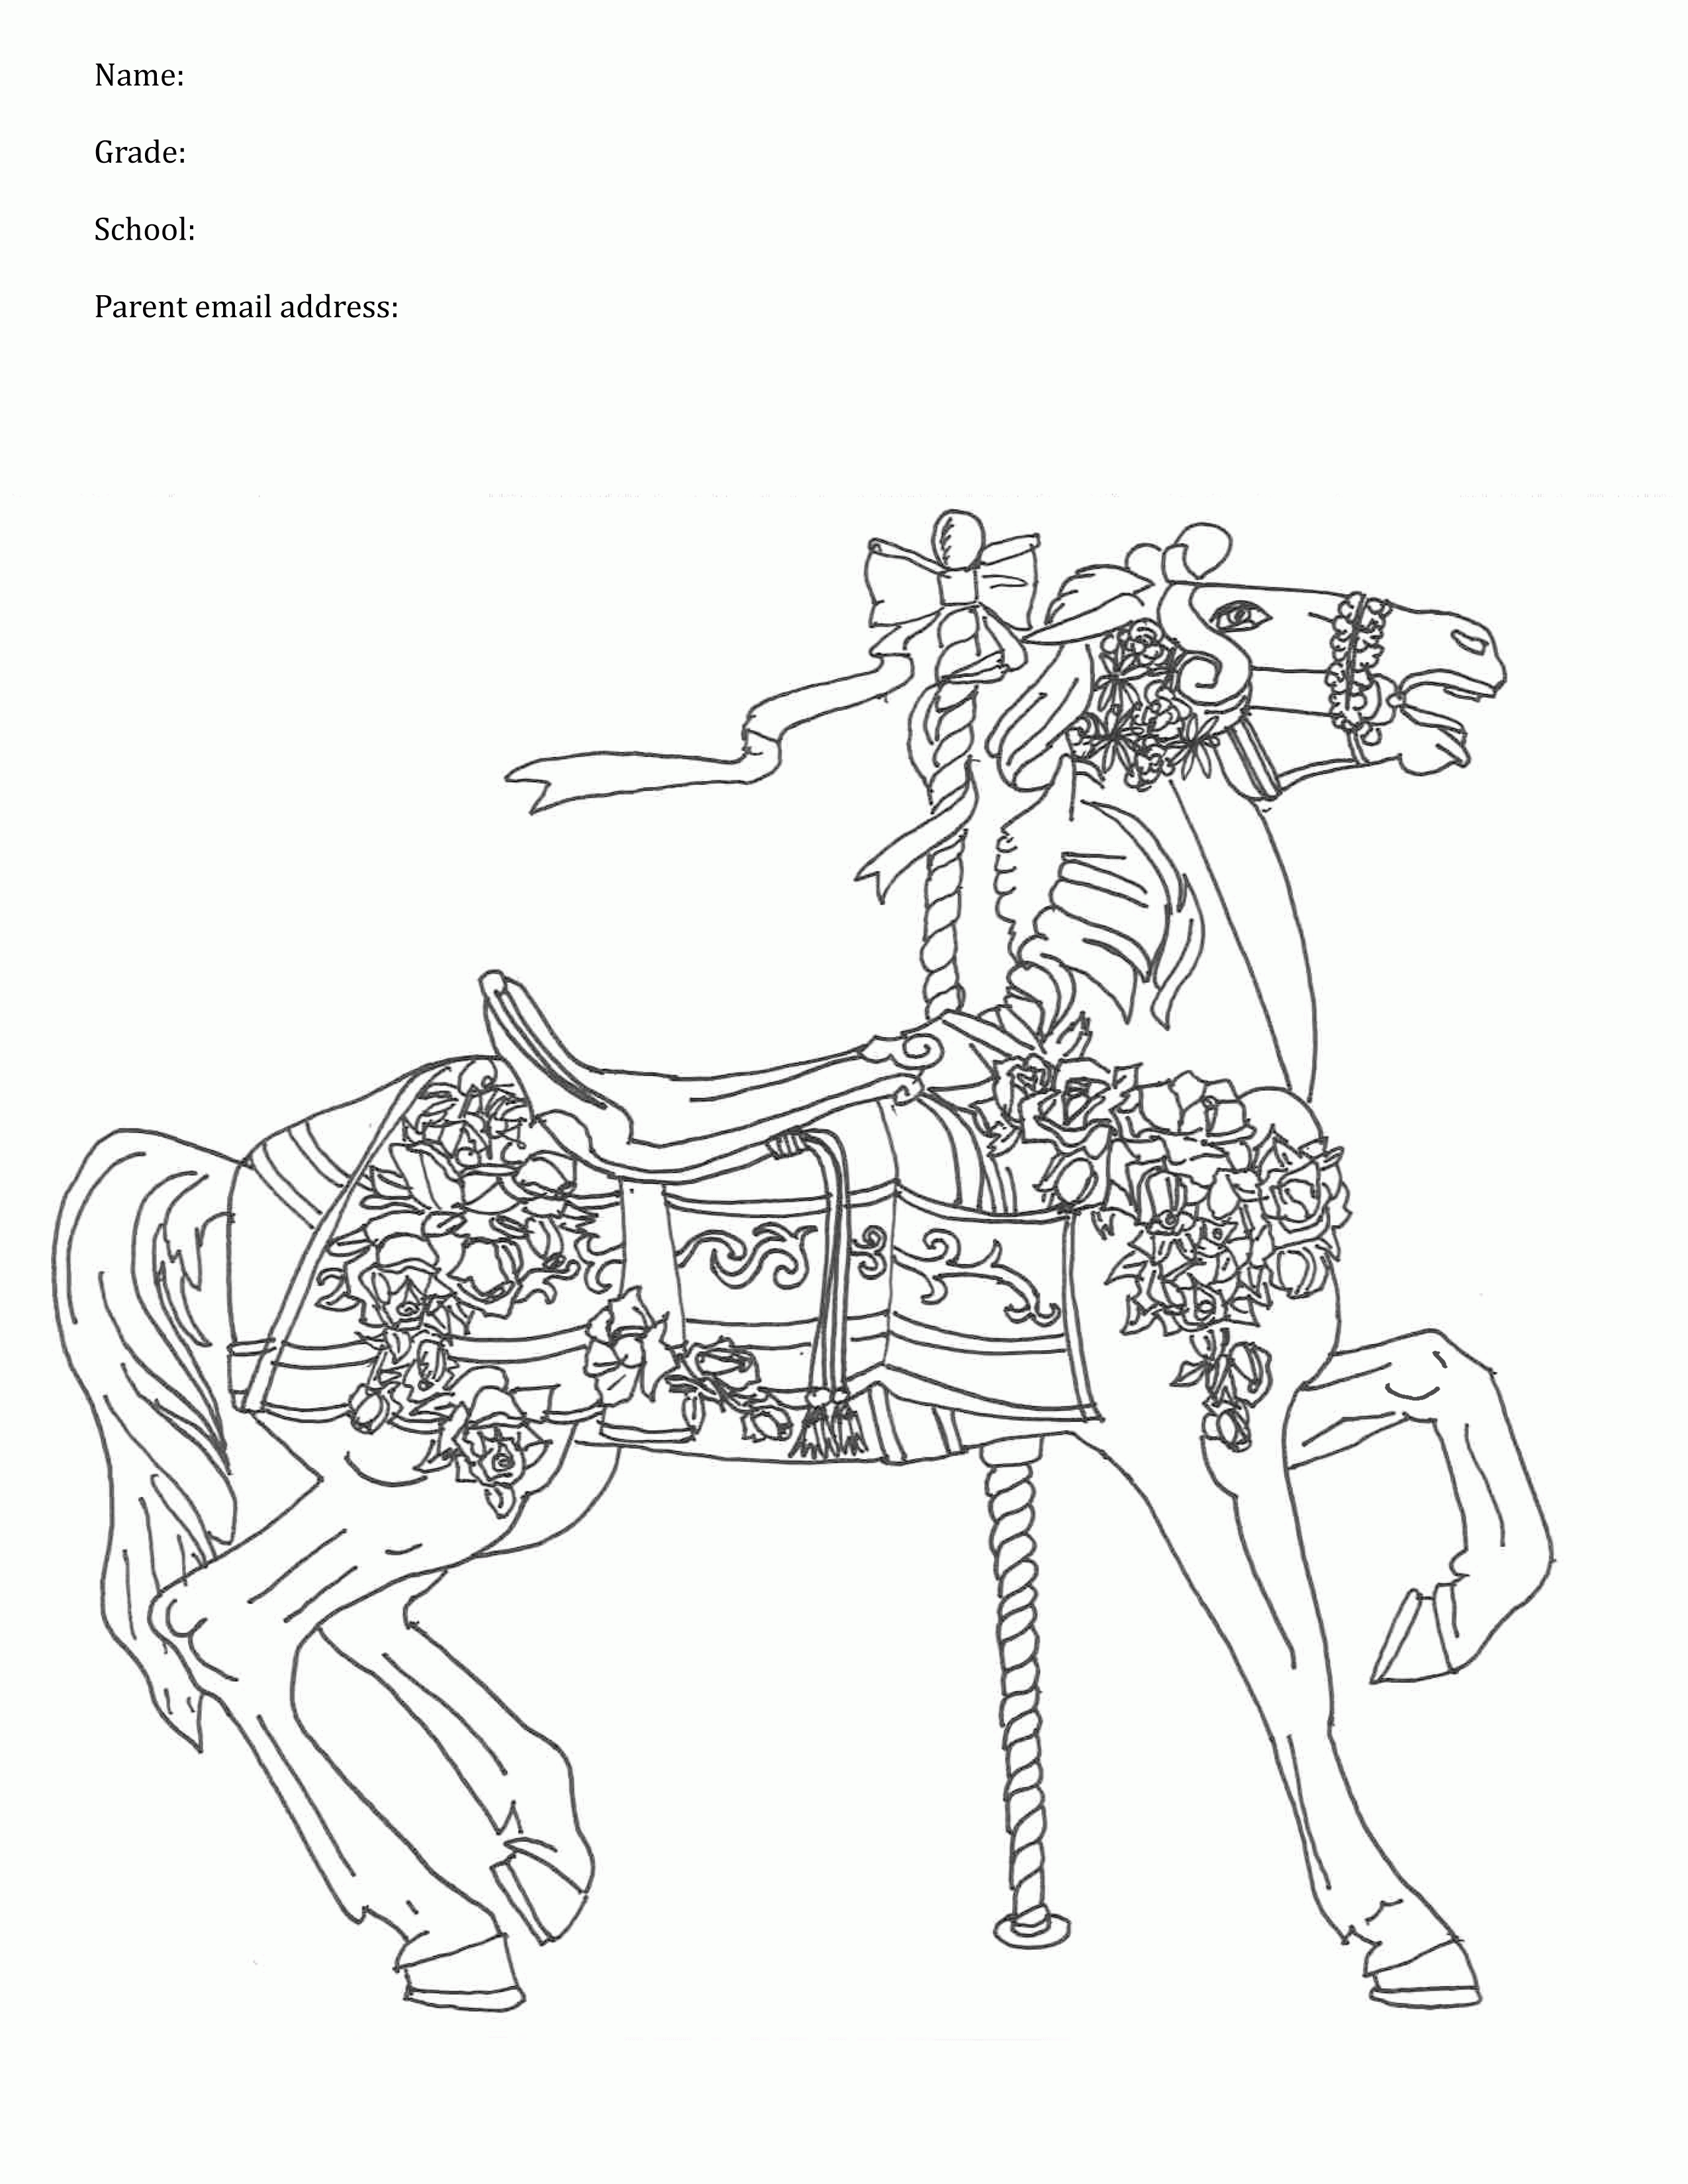 Download Carousel Horses Coloring Pages - Coloring Home